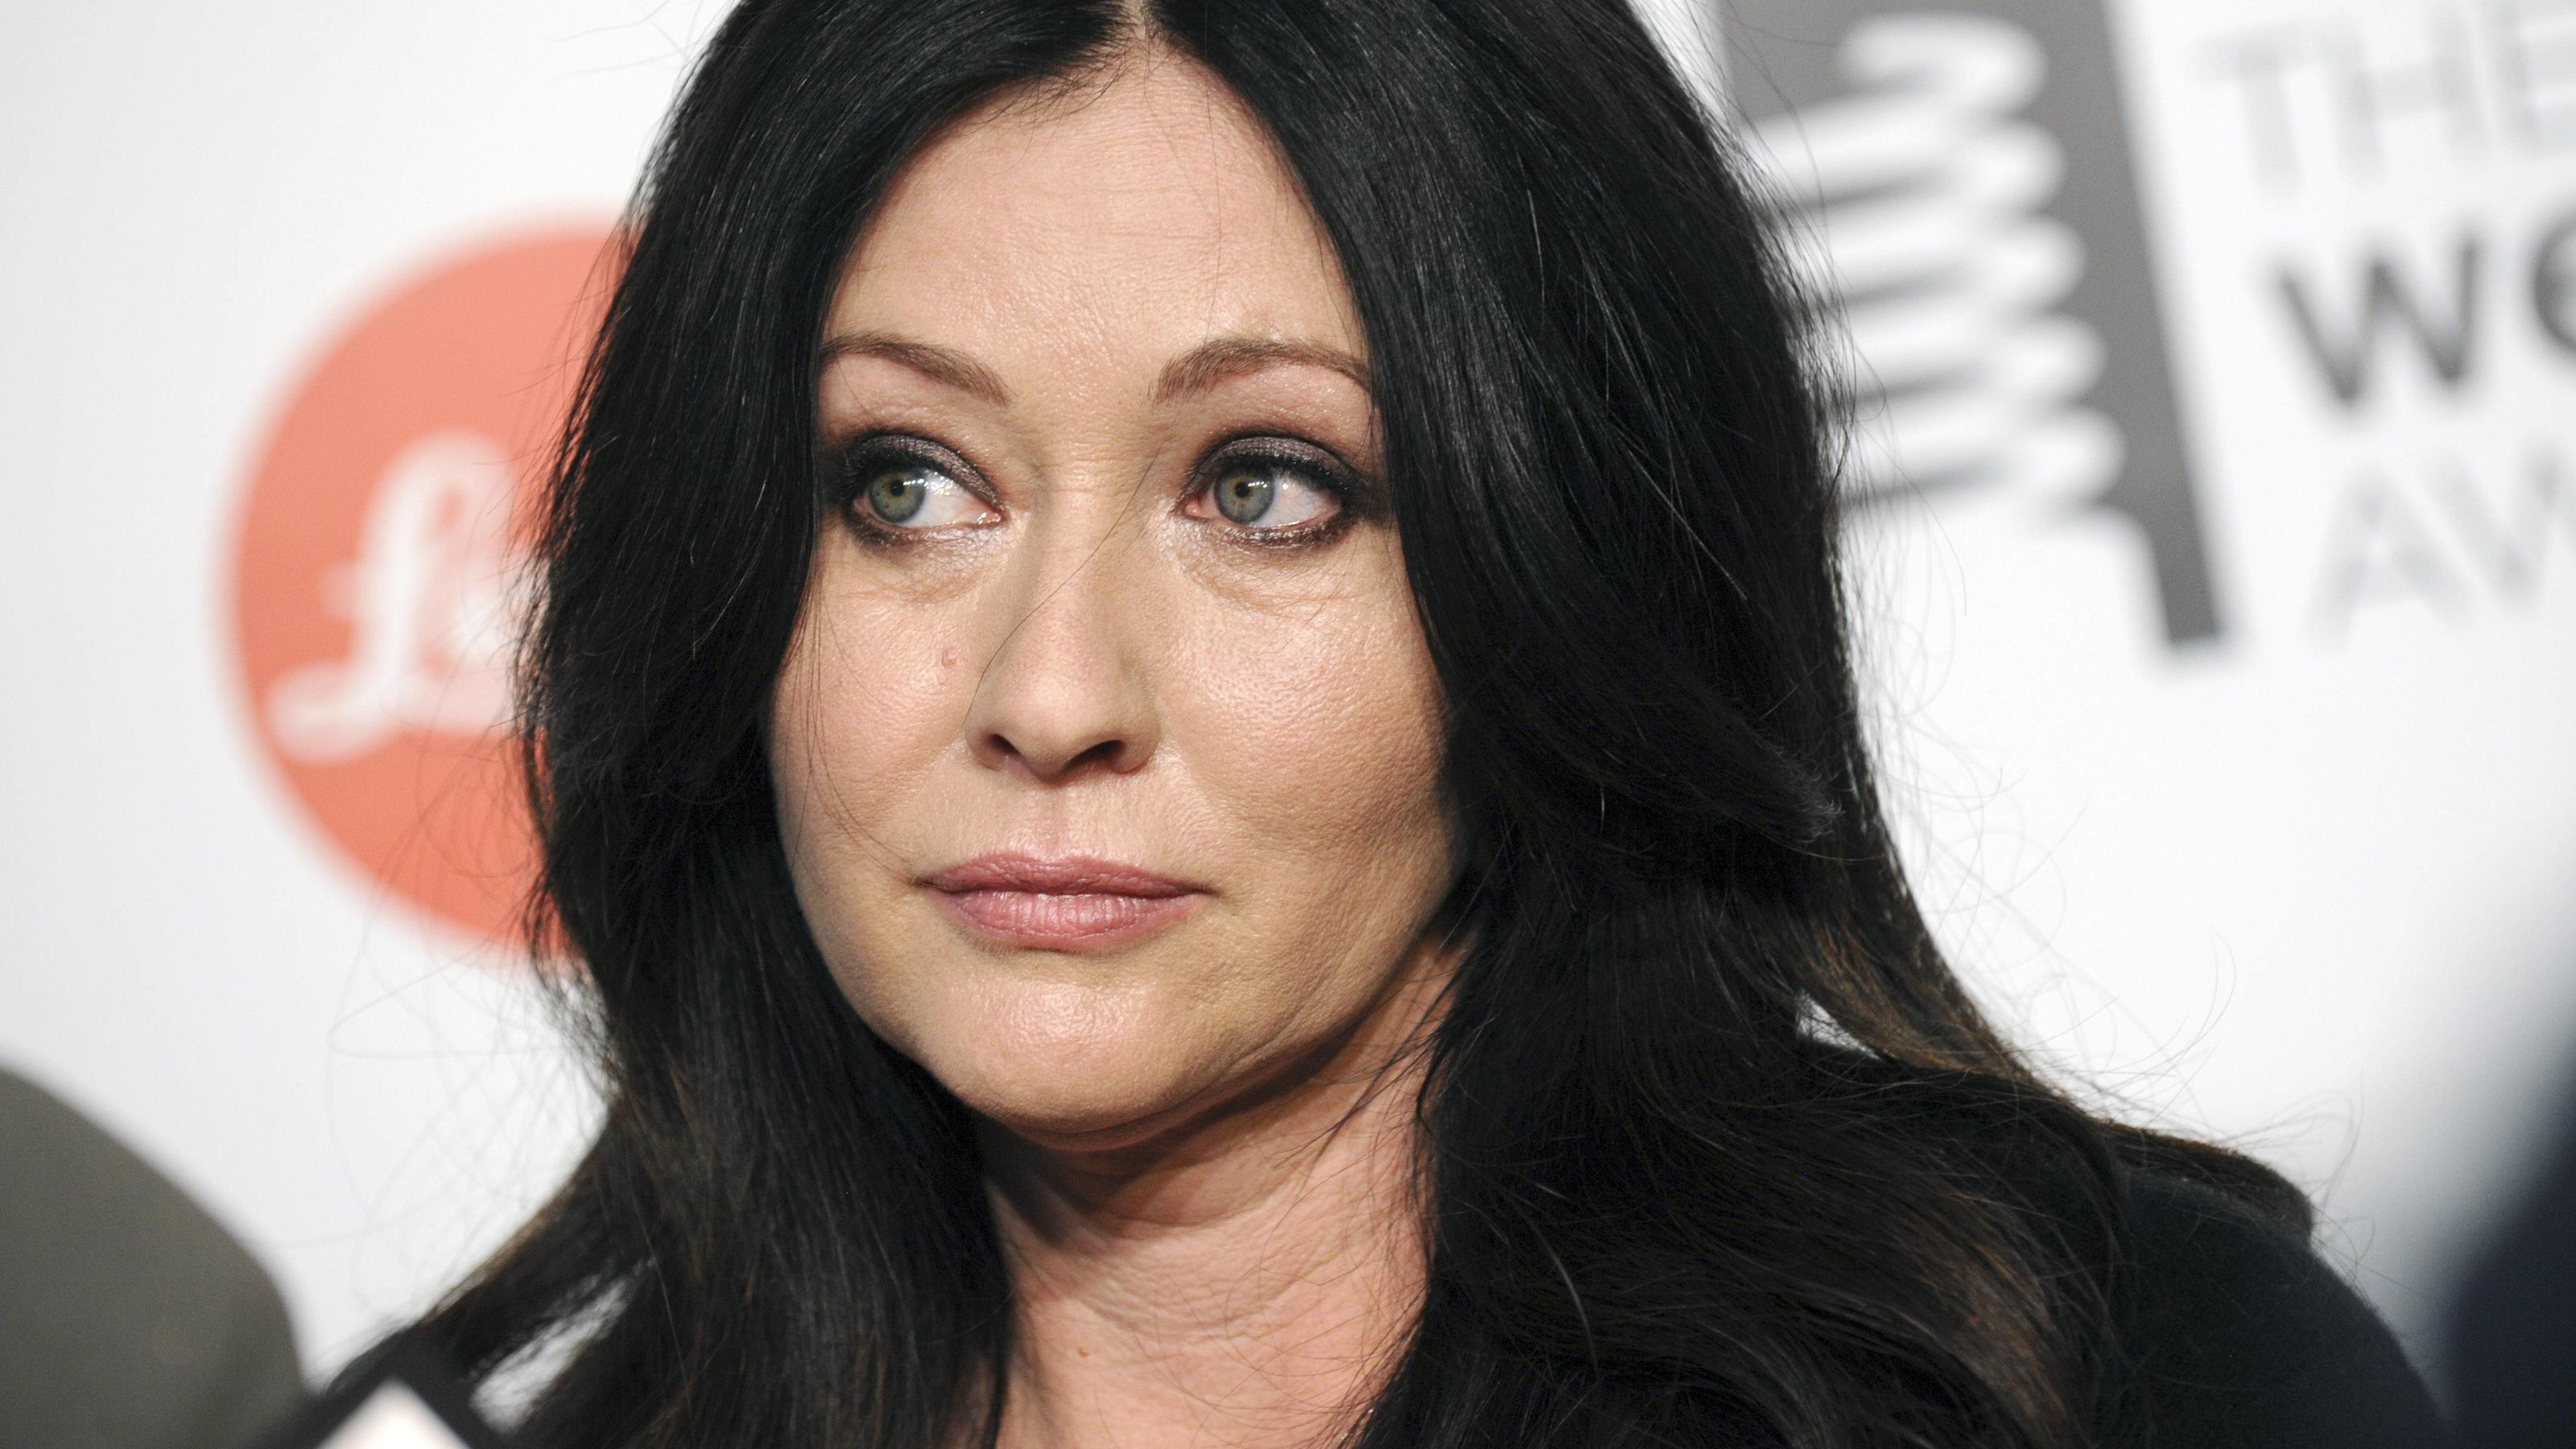 Shannen doherty of photos Shannen Doherty